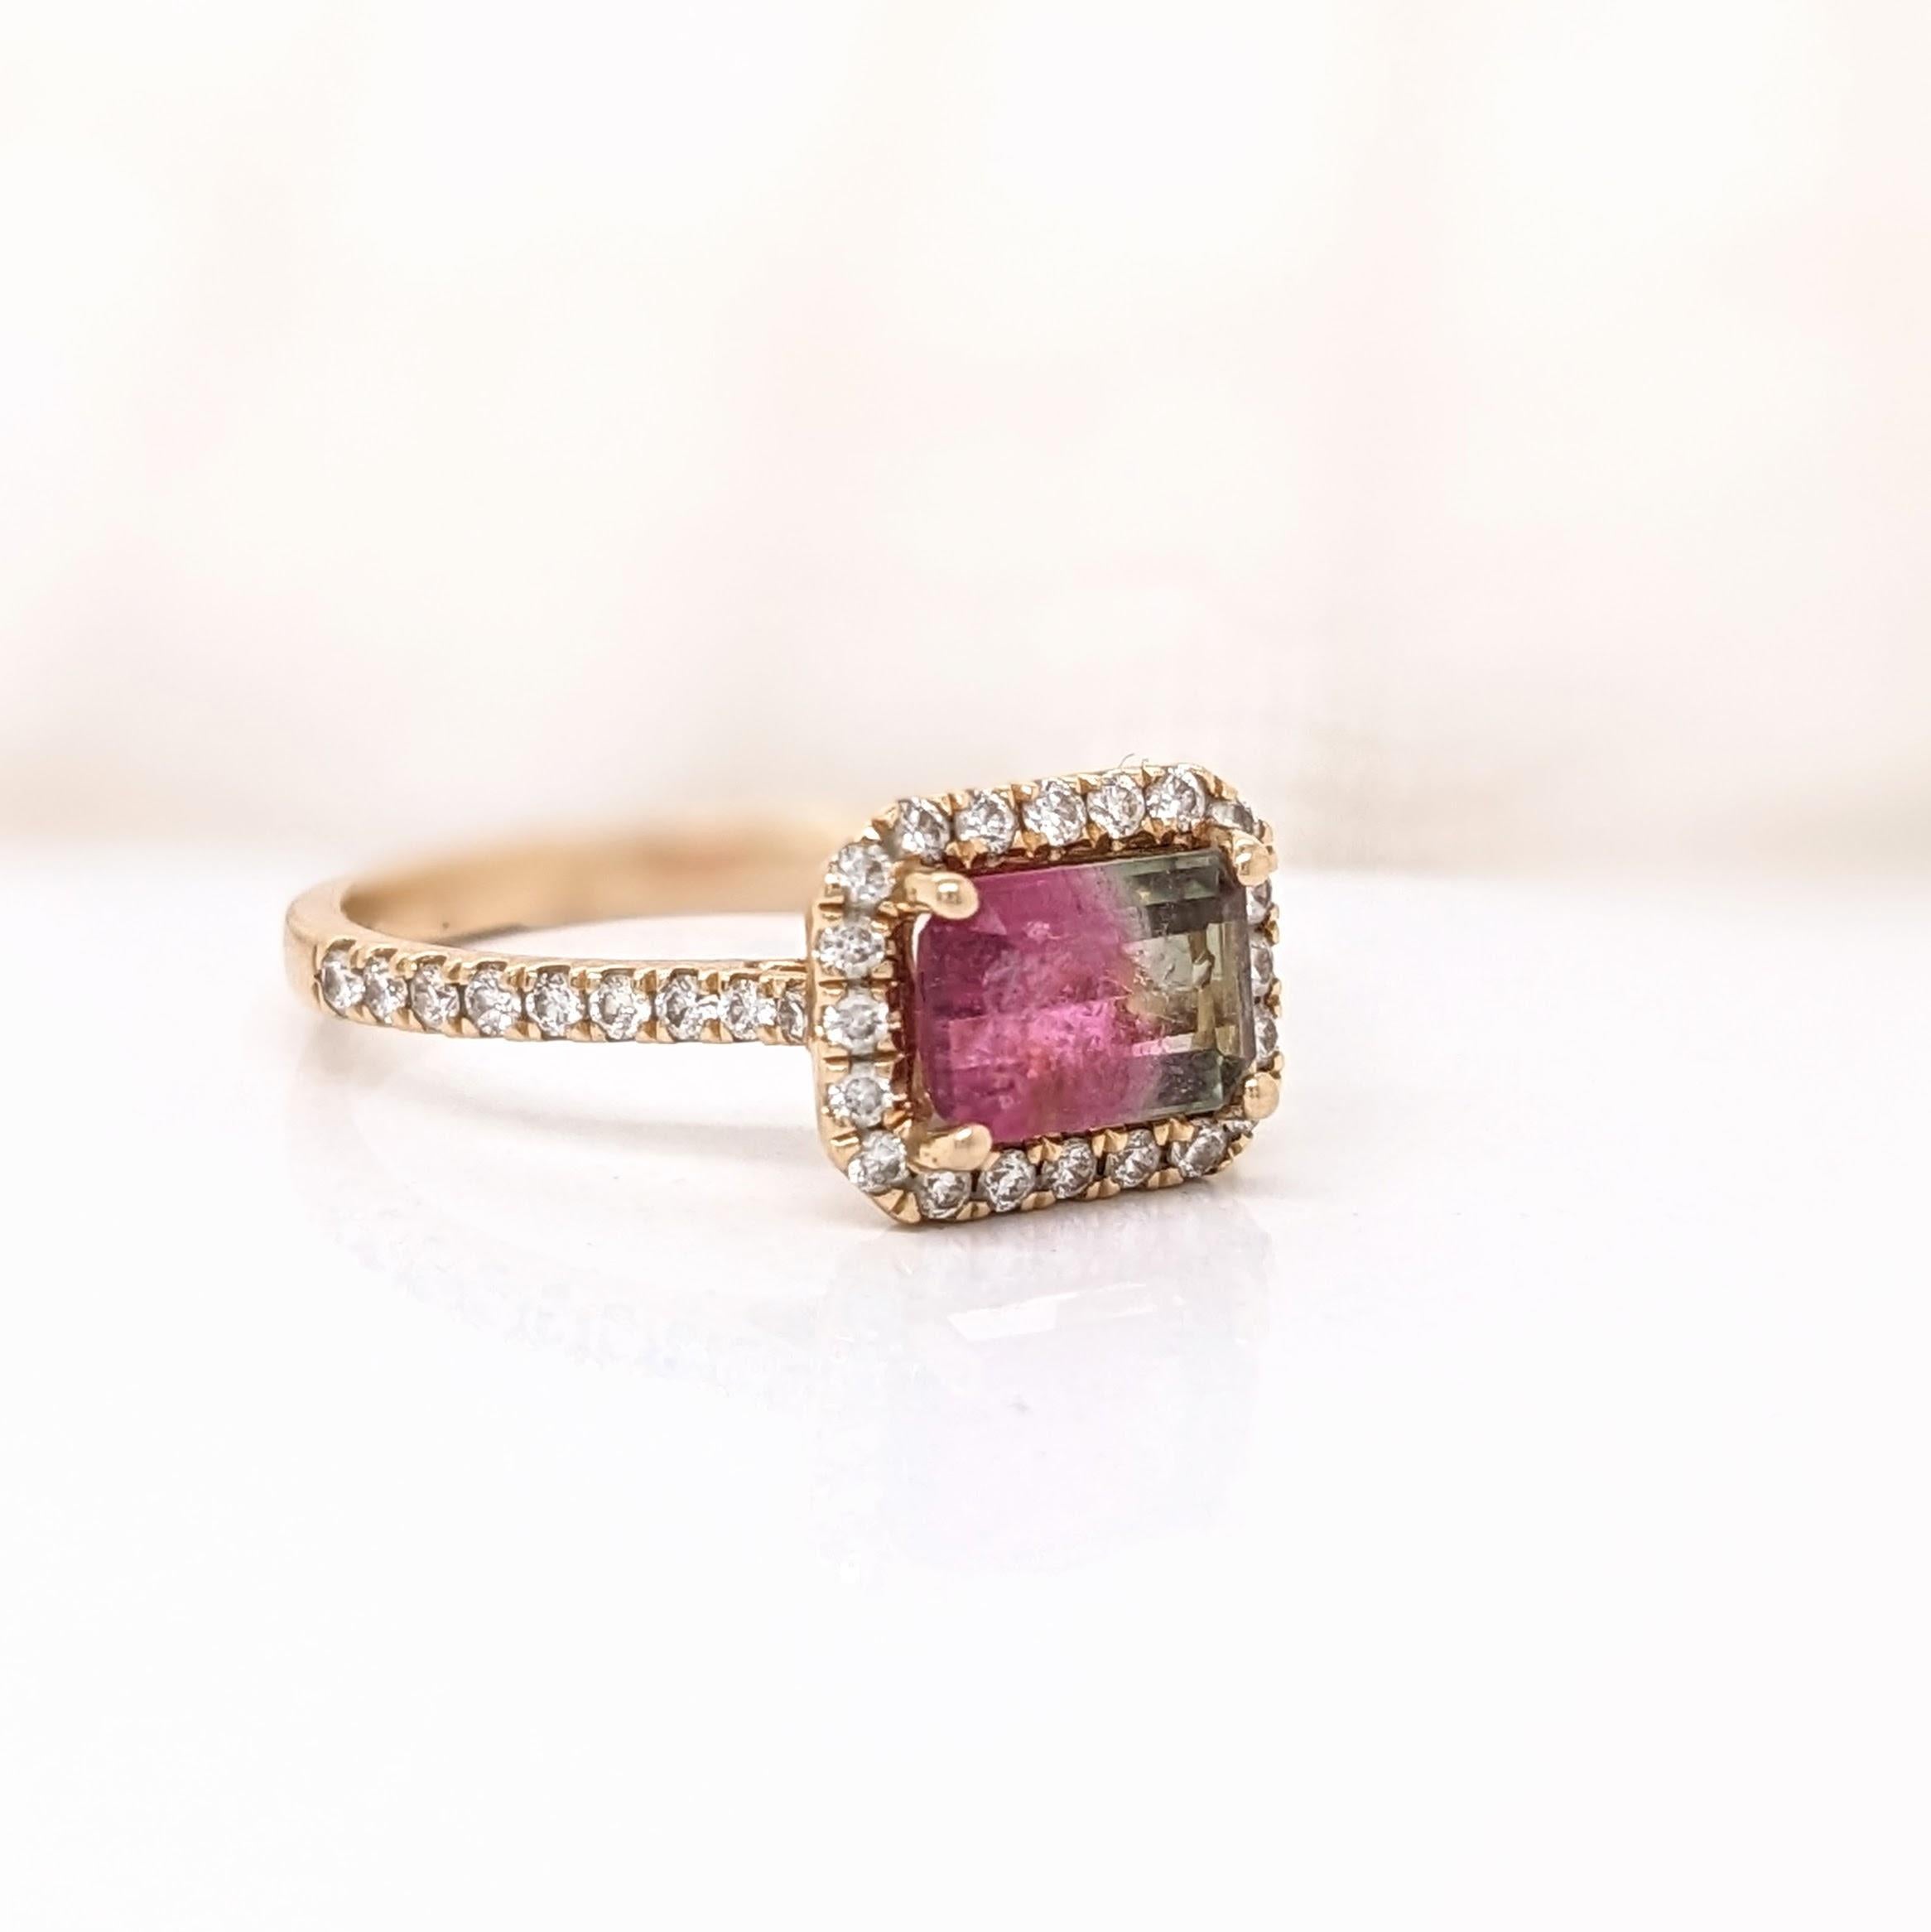 Watermelon Tourmaline Ring w Earth Mined Diamonds in Solid 14K Gold EM 5x7mm For Sale 2